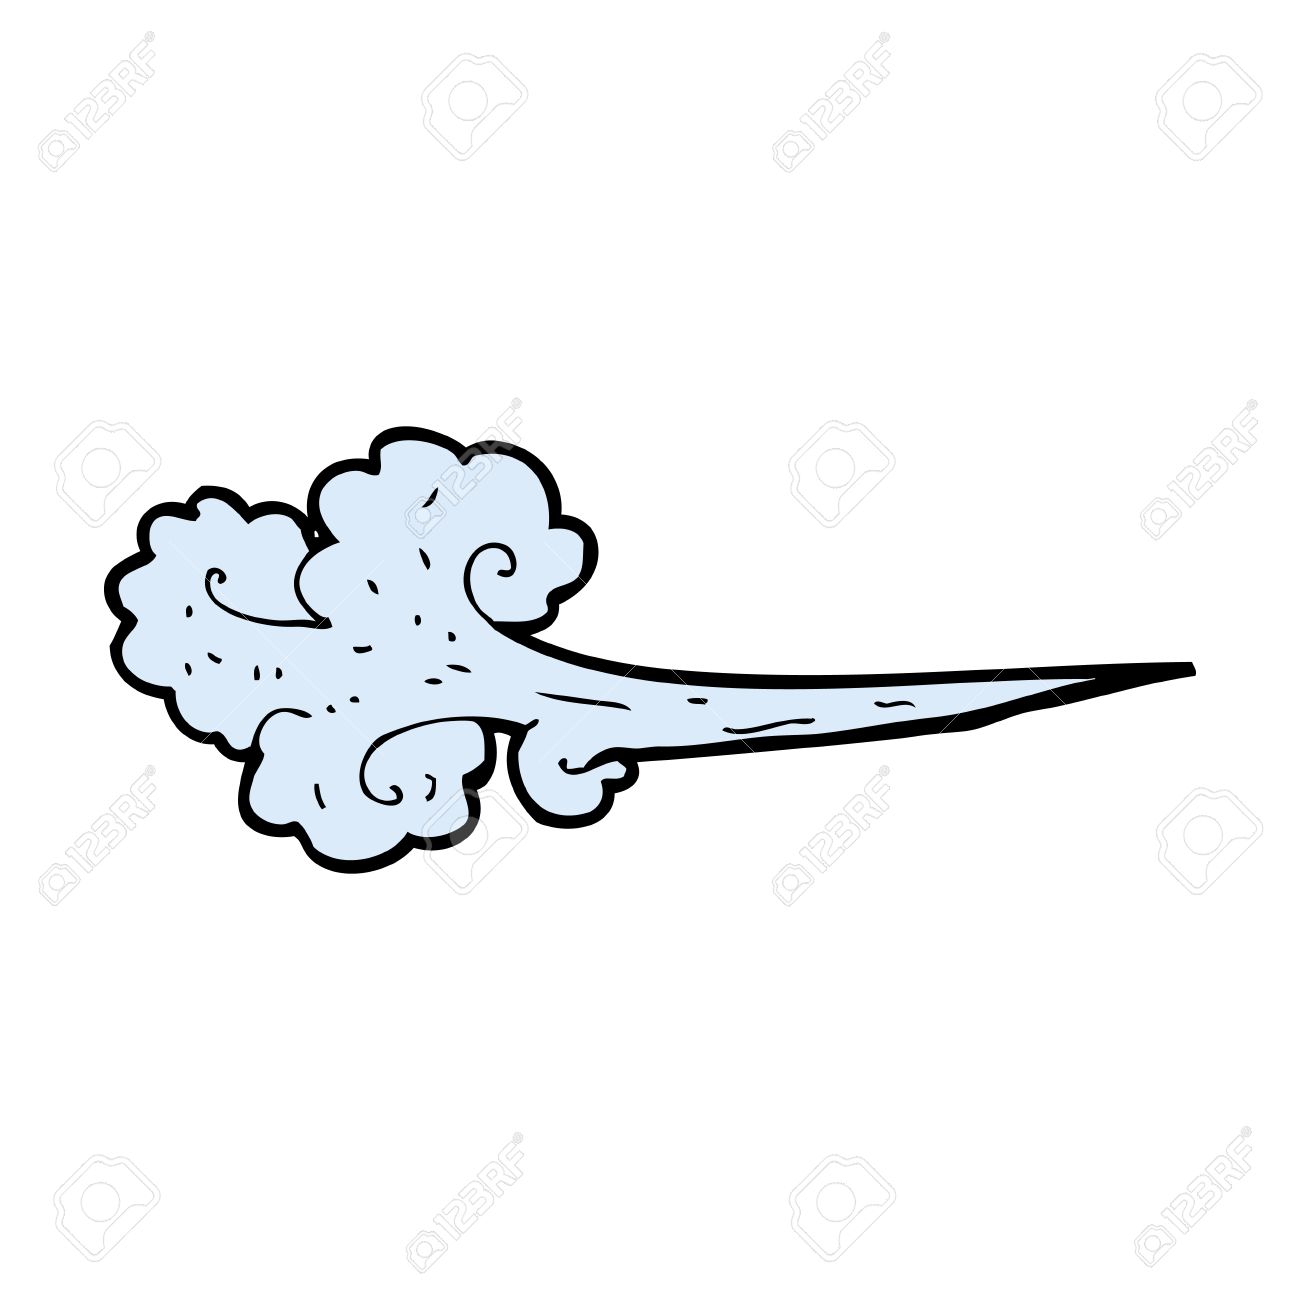 Cartoon hdq cover for. Air clipart gust wind